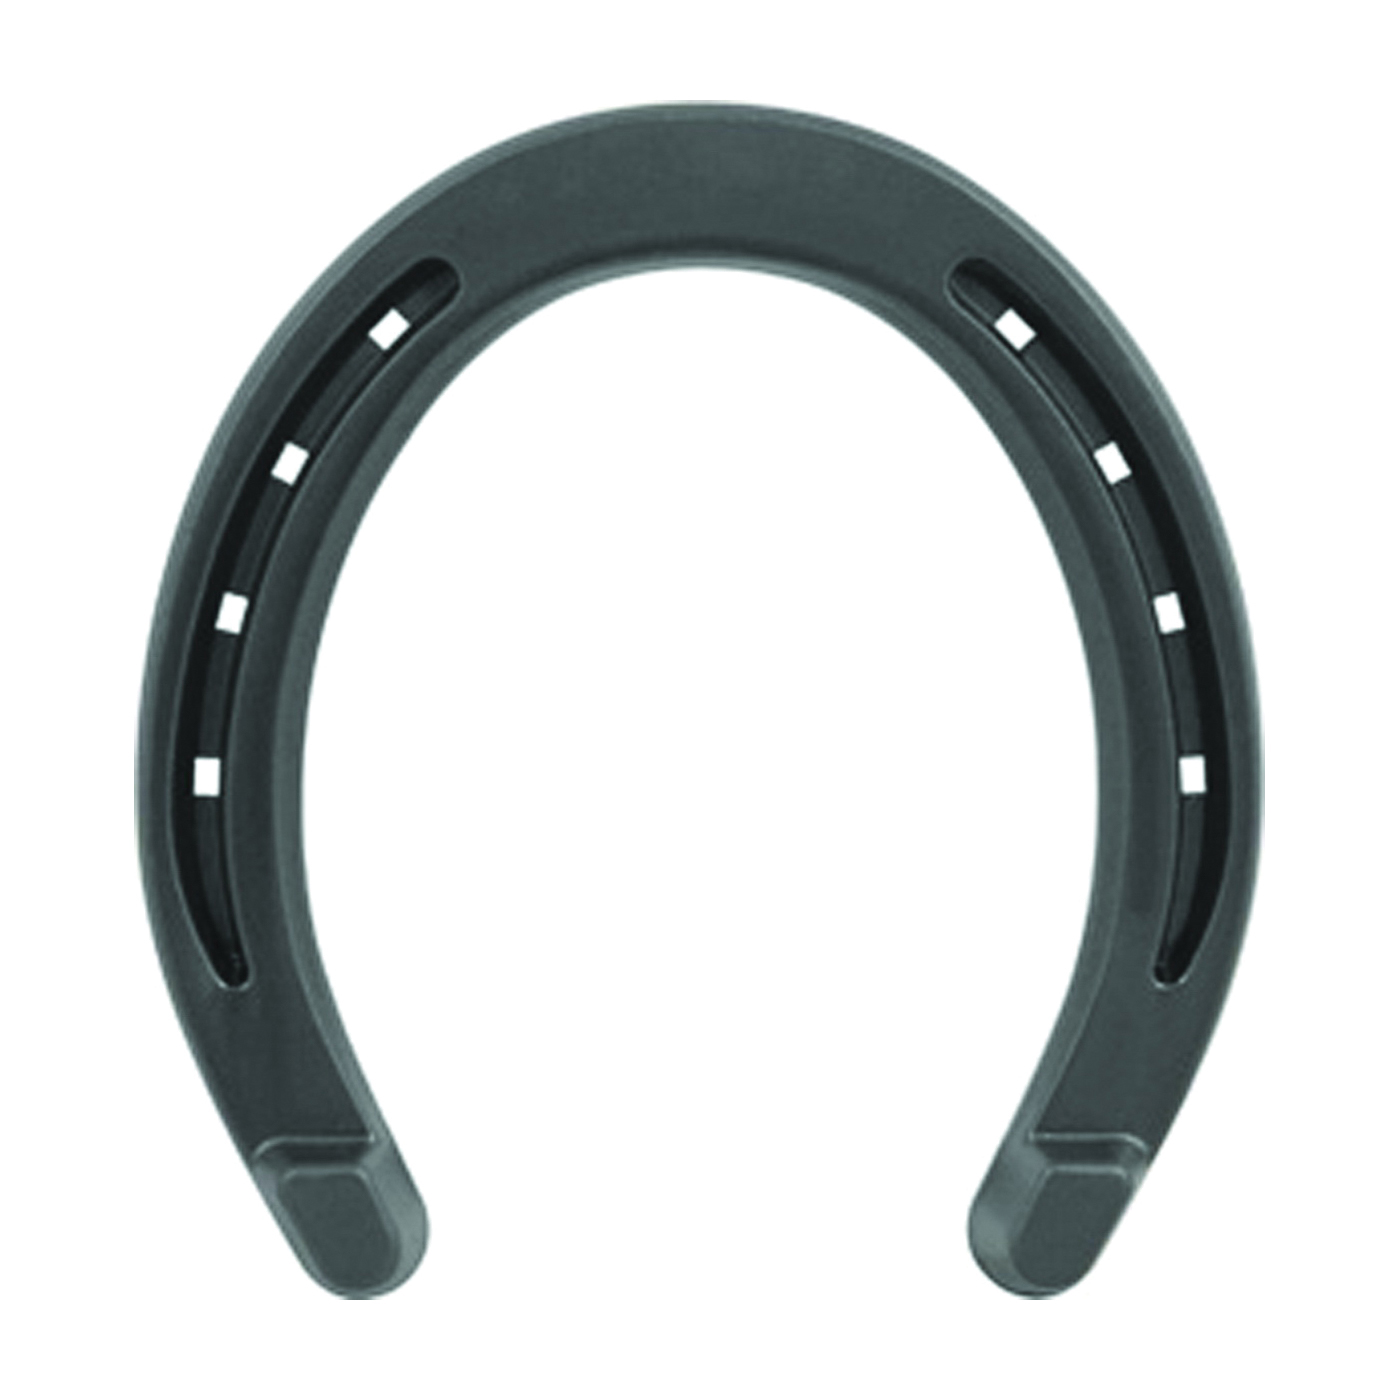 Farrier DC00HB Horseshoe, 1/4 in Thick, #00, Steel